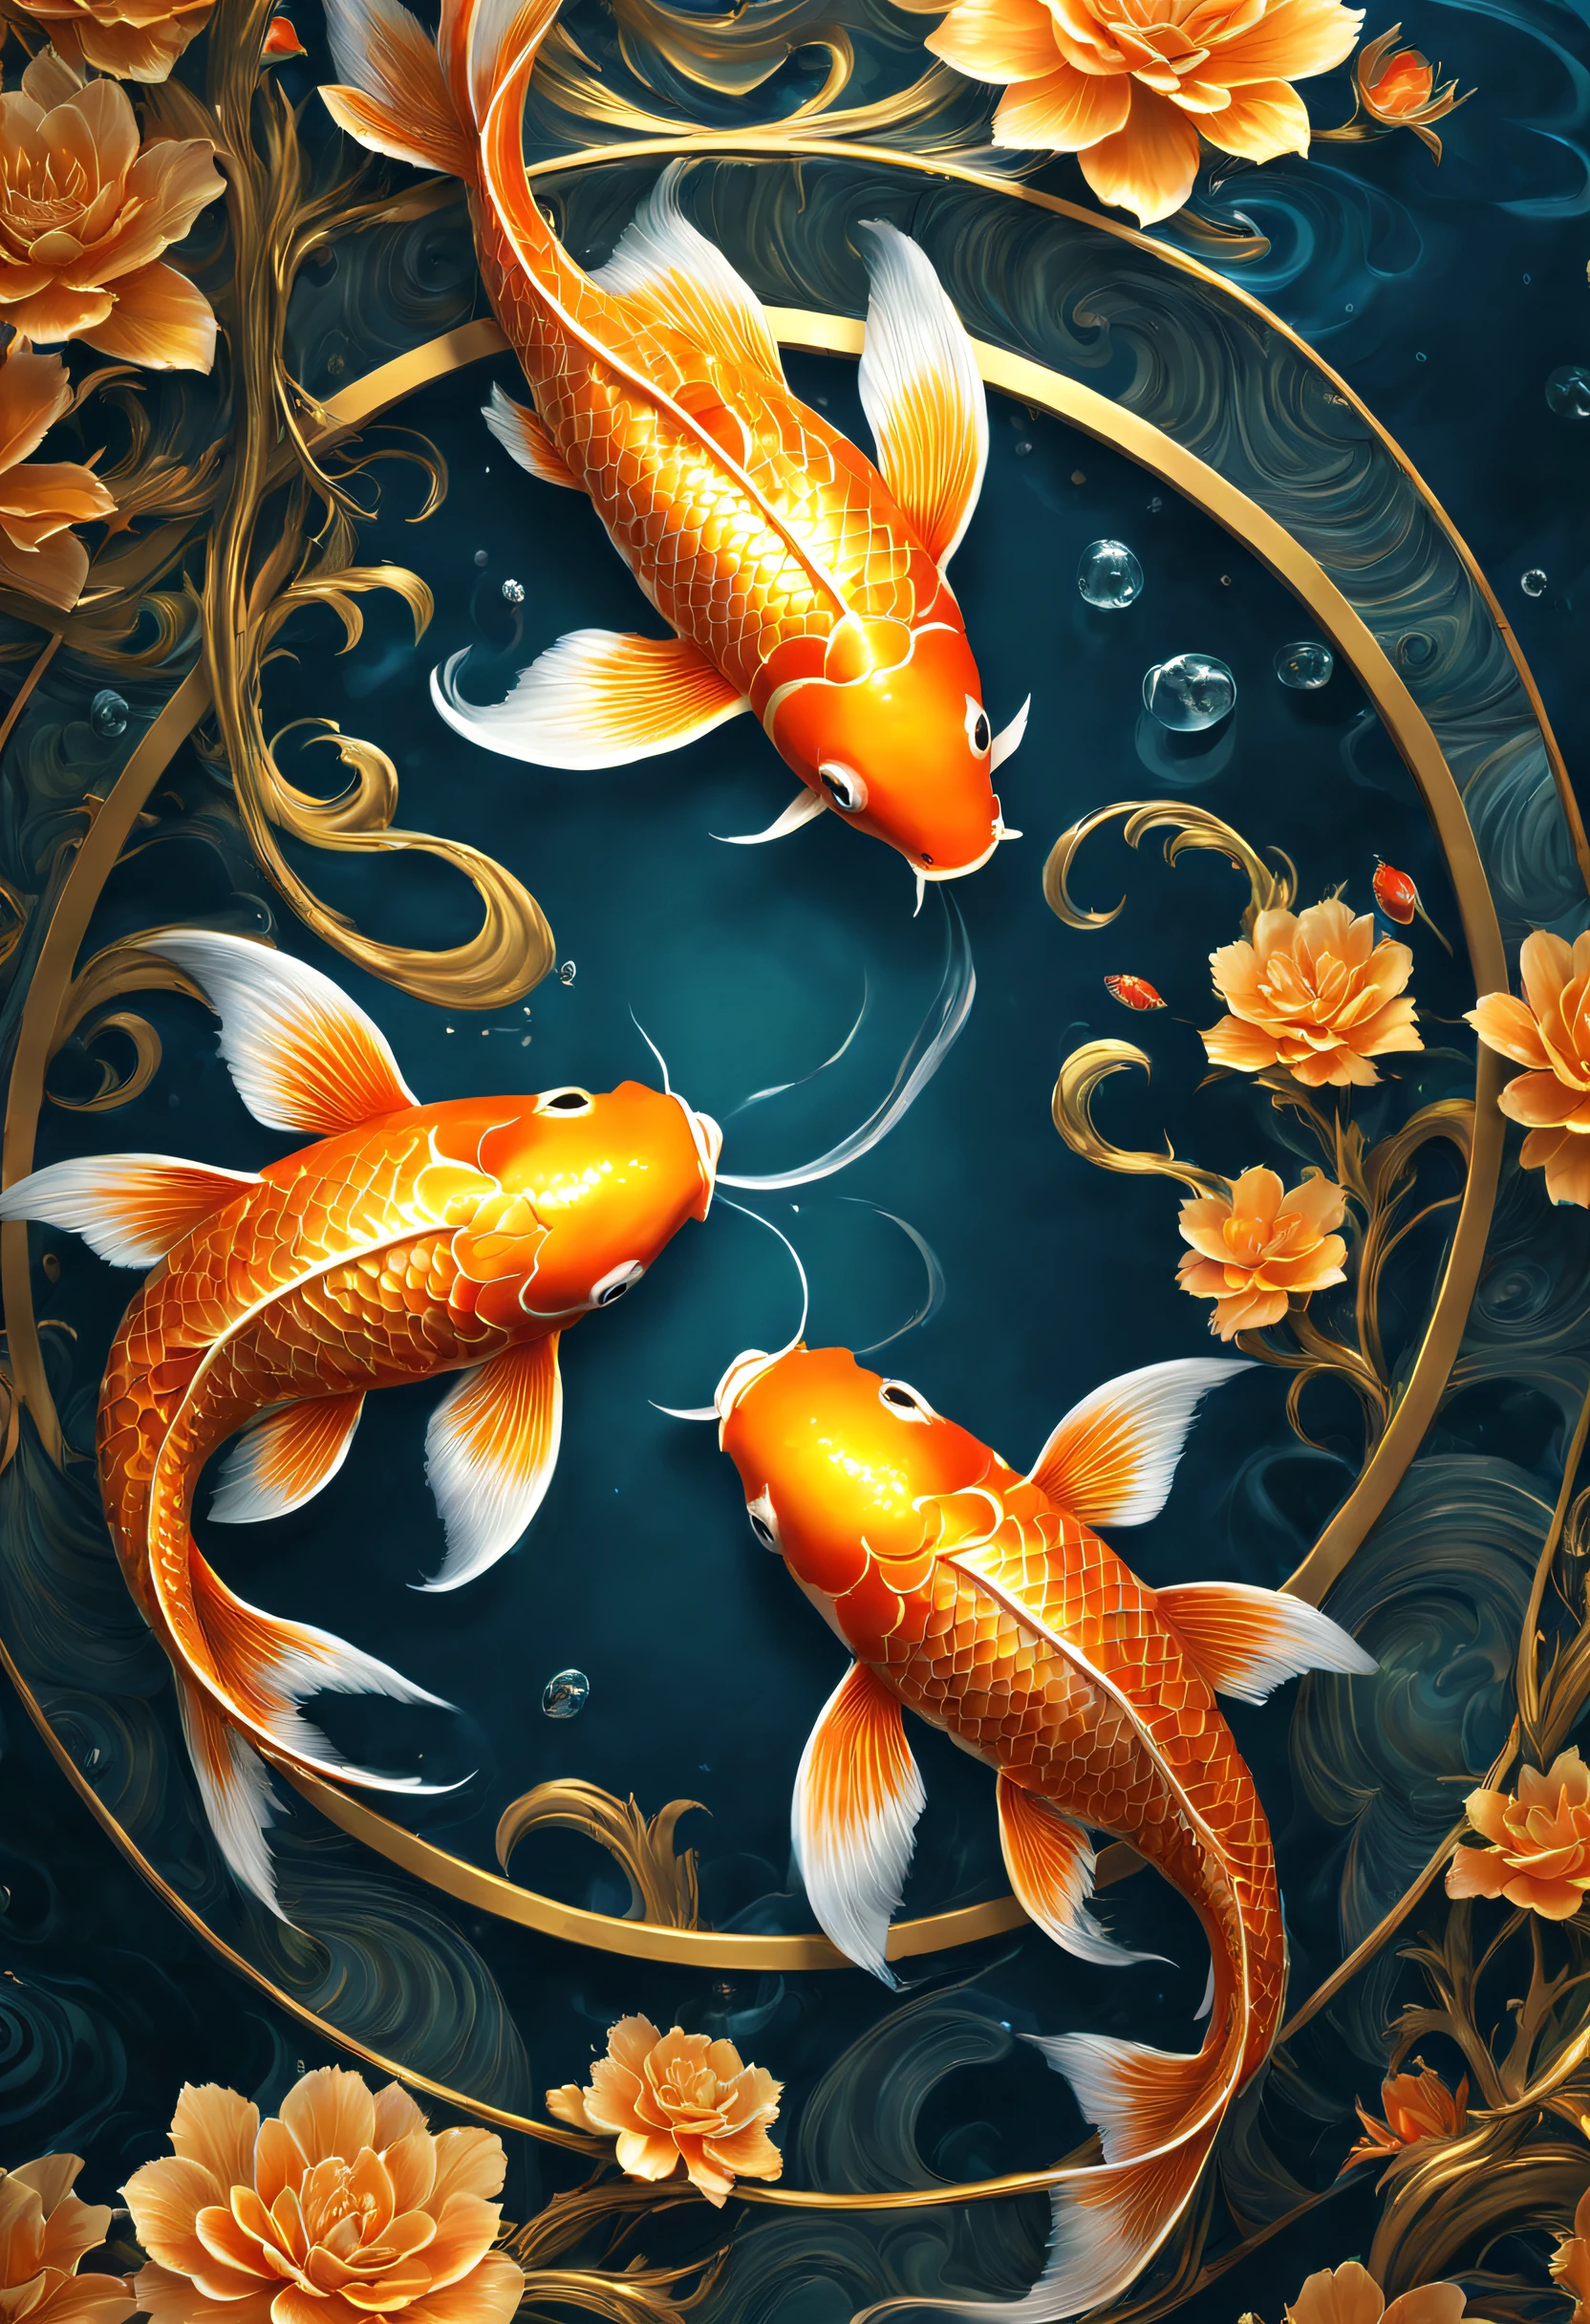 ((Best quality at best)), ((tmasterpiece)), ((k hd)), ((A high resolution)), ((Perfect artwork)),There are only two identical koi fish in a circle,3d effect, (atmosphere:  a gorgeous, splendor, mysterious background: The halo, Holy, kinakoen dragons), (the detail, closeup cleavage, kinako)